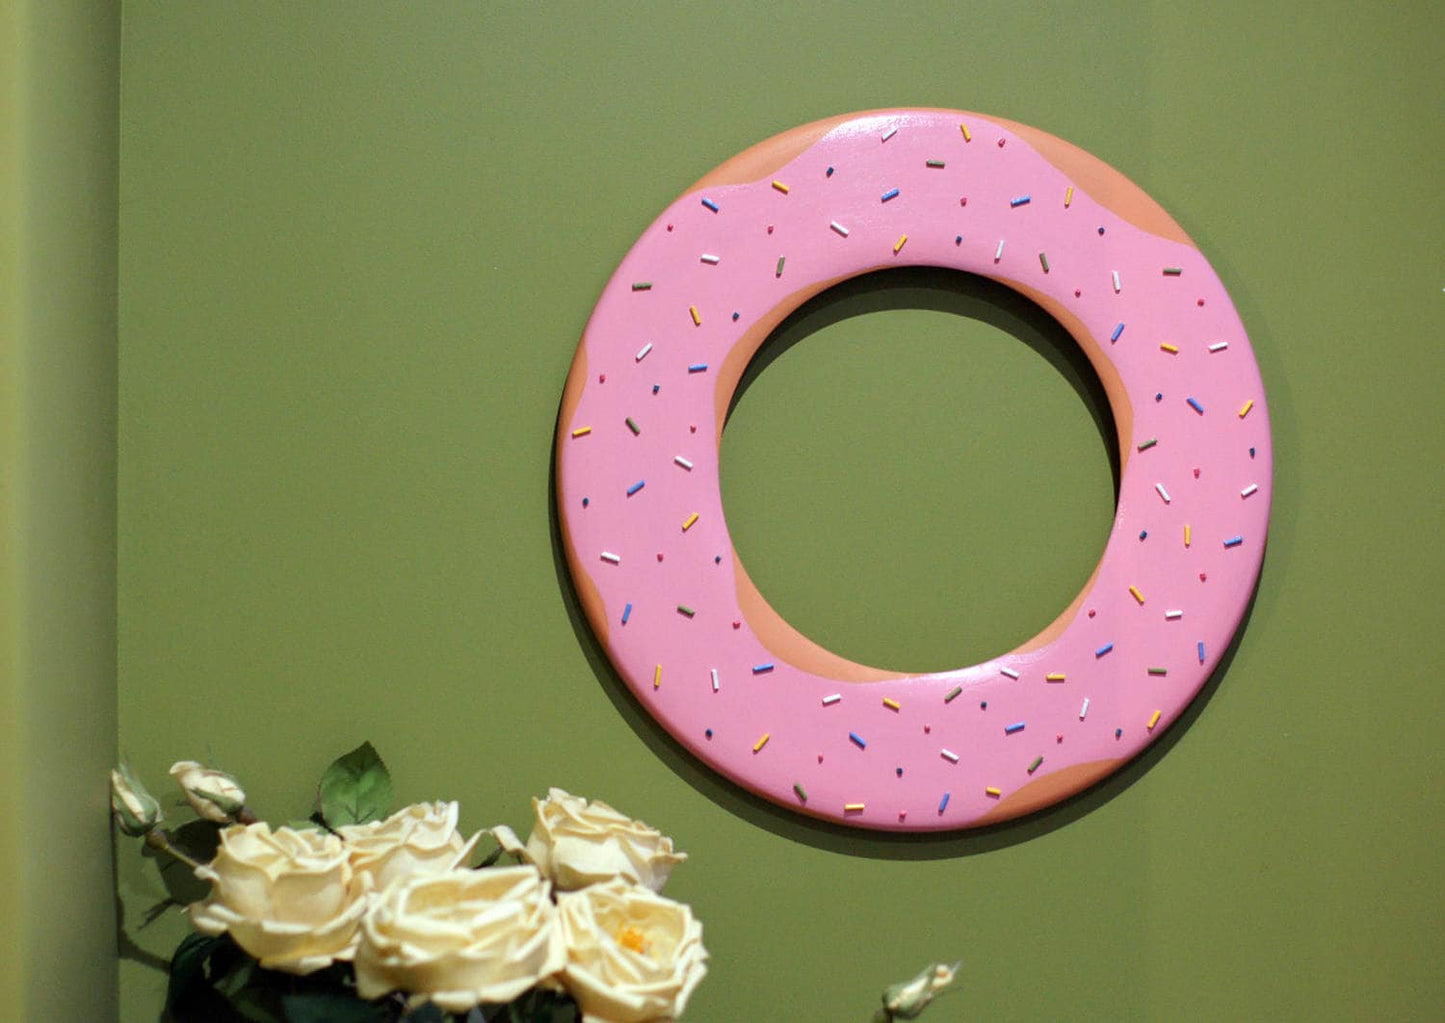 Childrens mirror for wall, Wall mirror for kids room, Unique candy mirror, Donuts frame mirror for kids room, Sweety mirror for baby